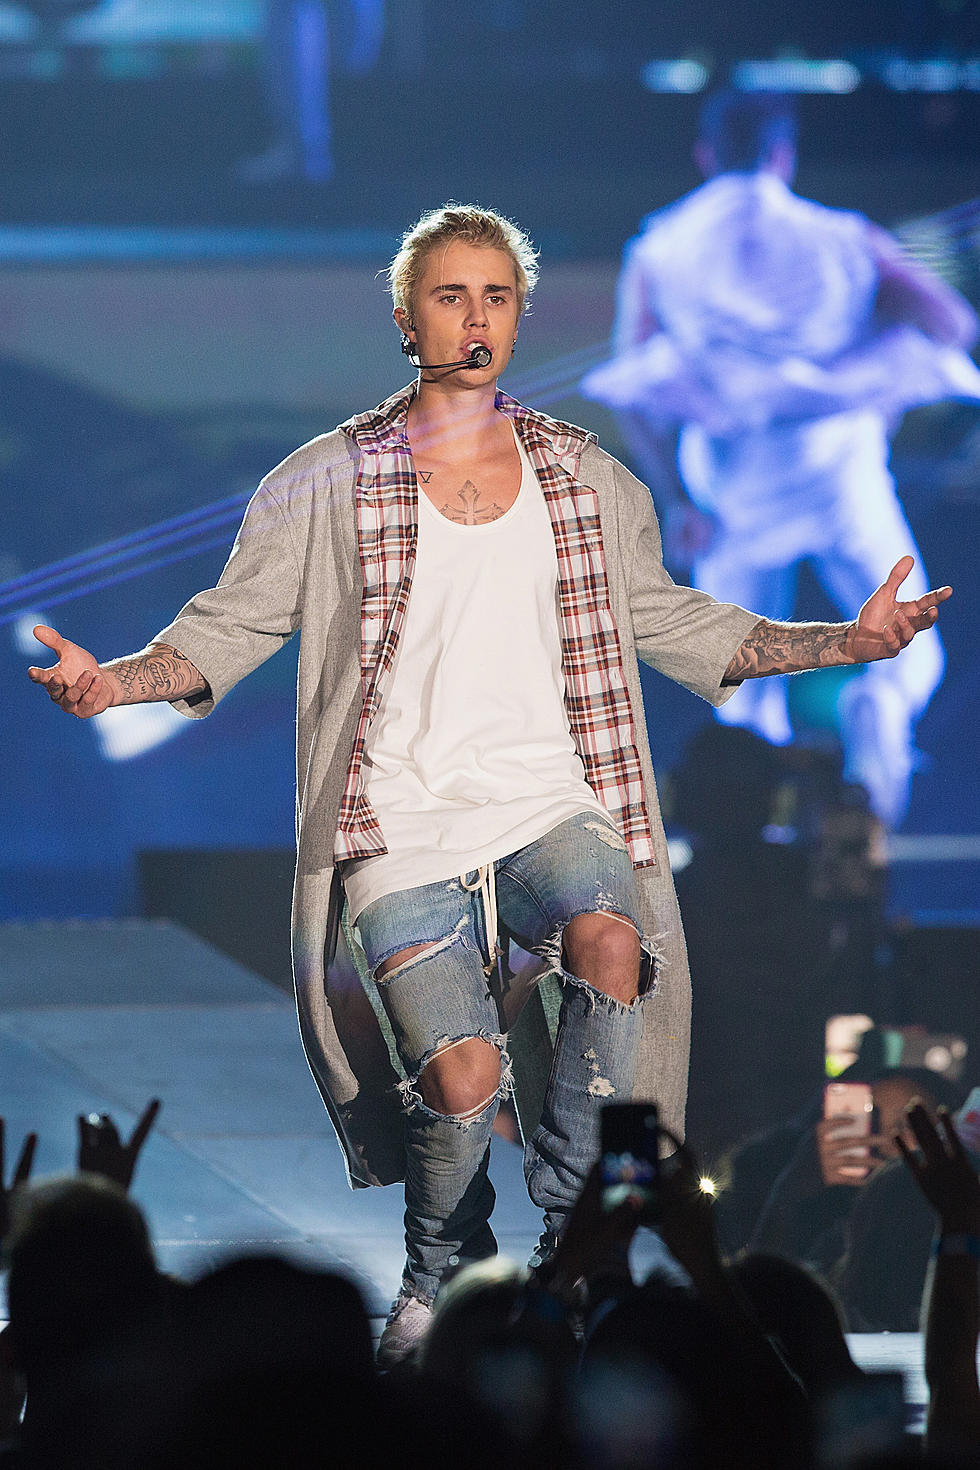 Justin Bieber Moved to Tears By His Own ‘Purpose’ Performance in Philly